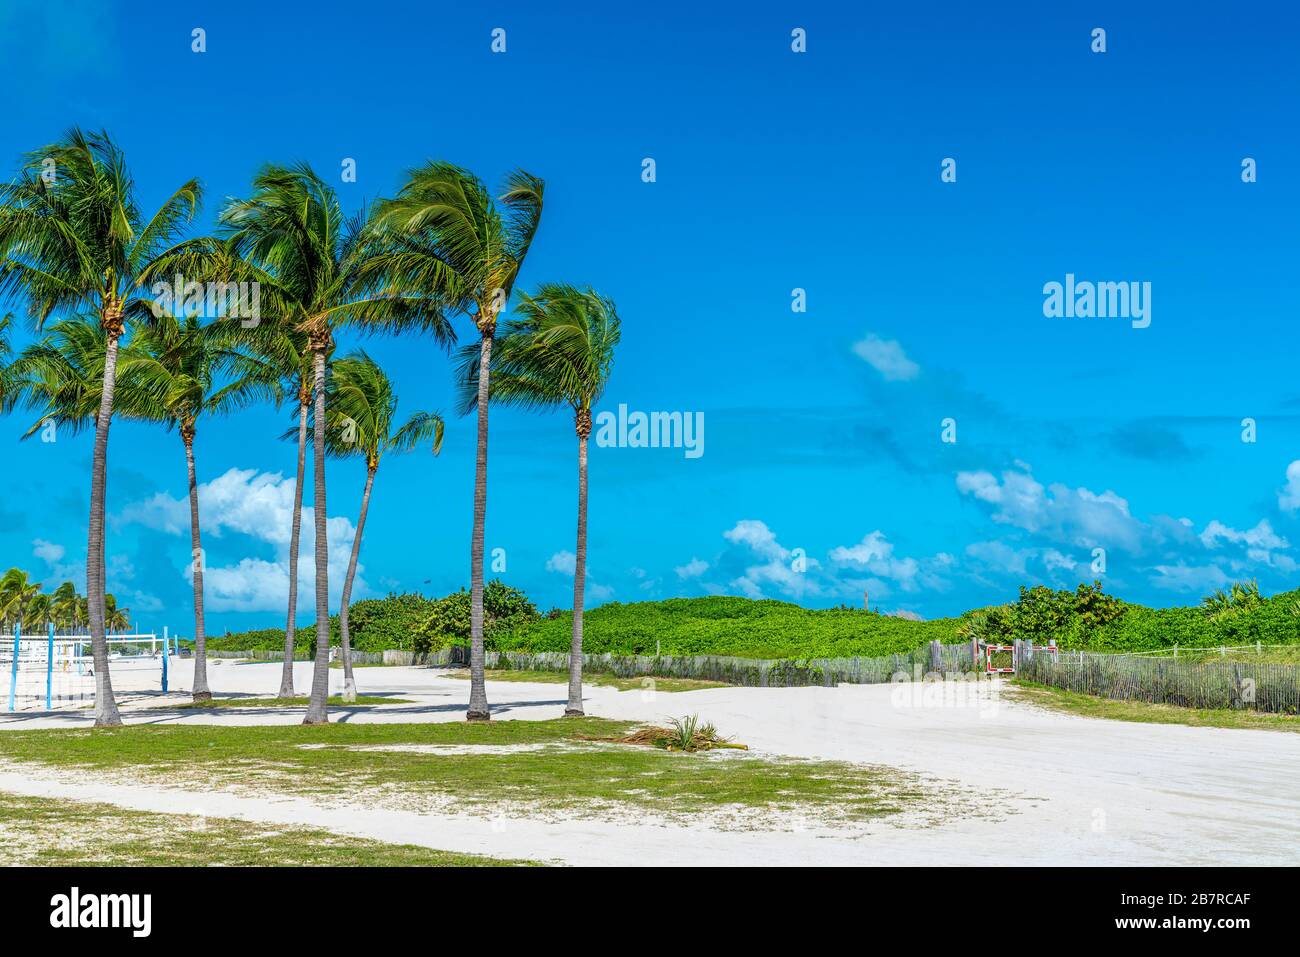 Sandy beach in Miami with palm trees and volleyball court, Florida. Stock Photo